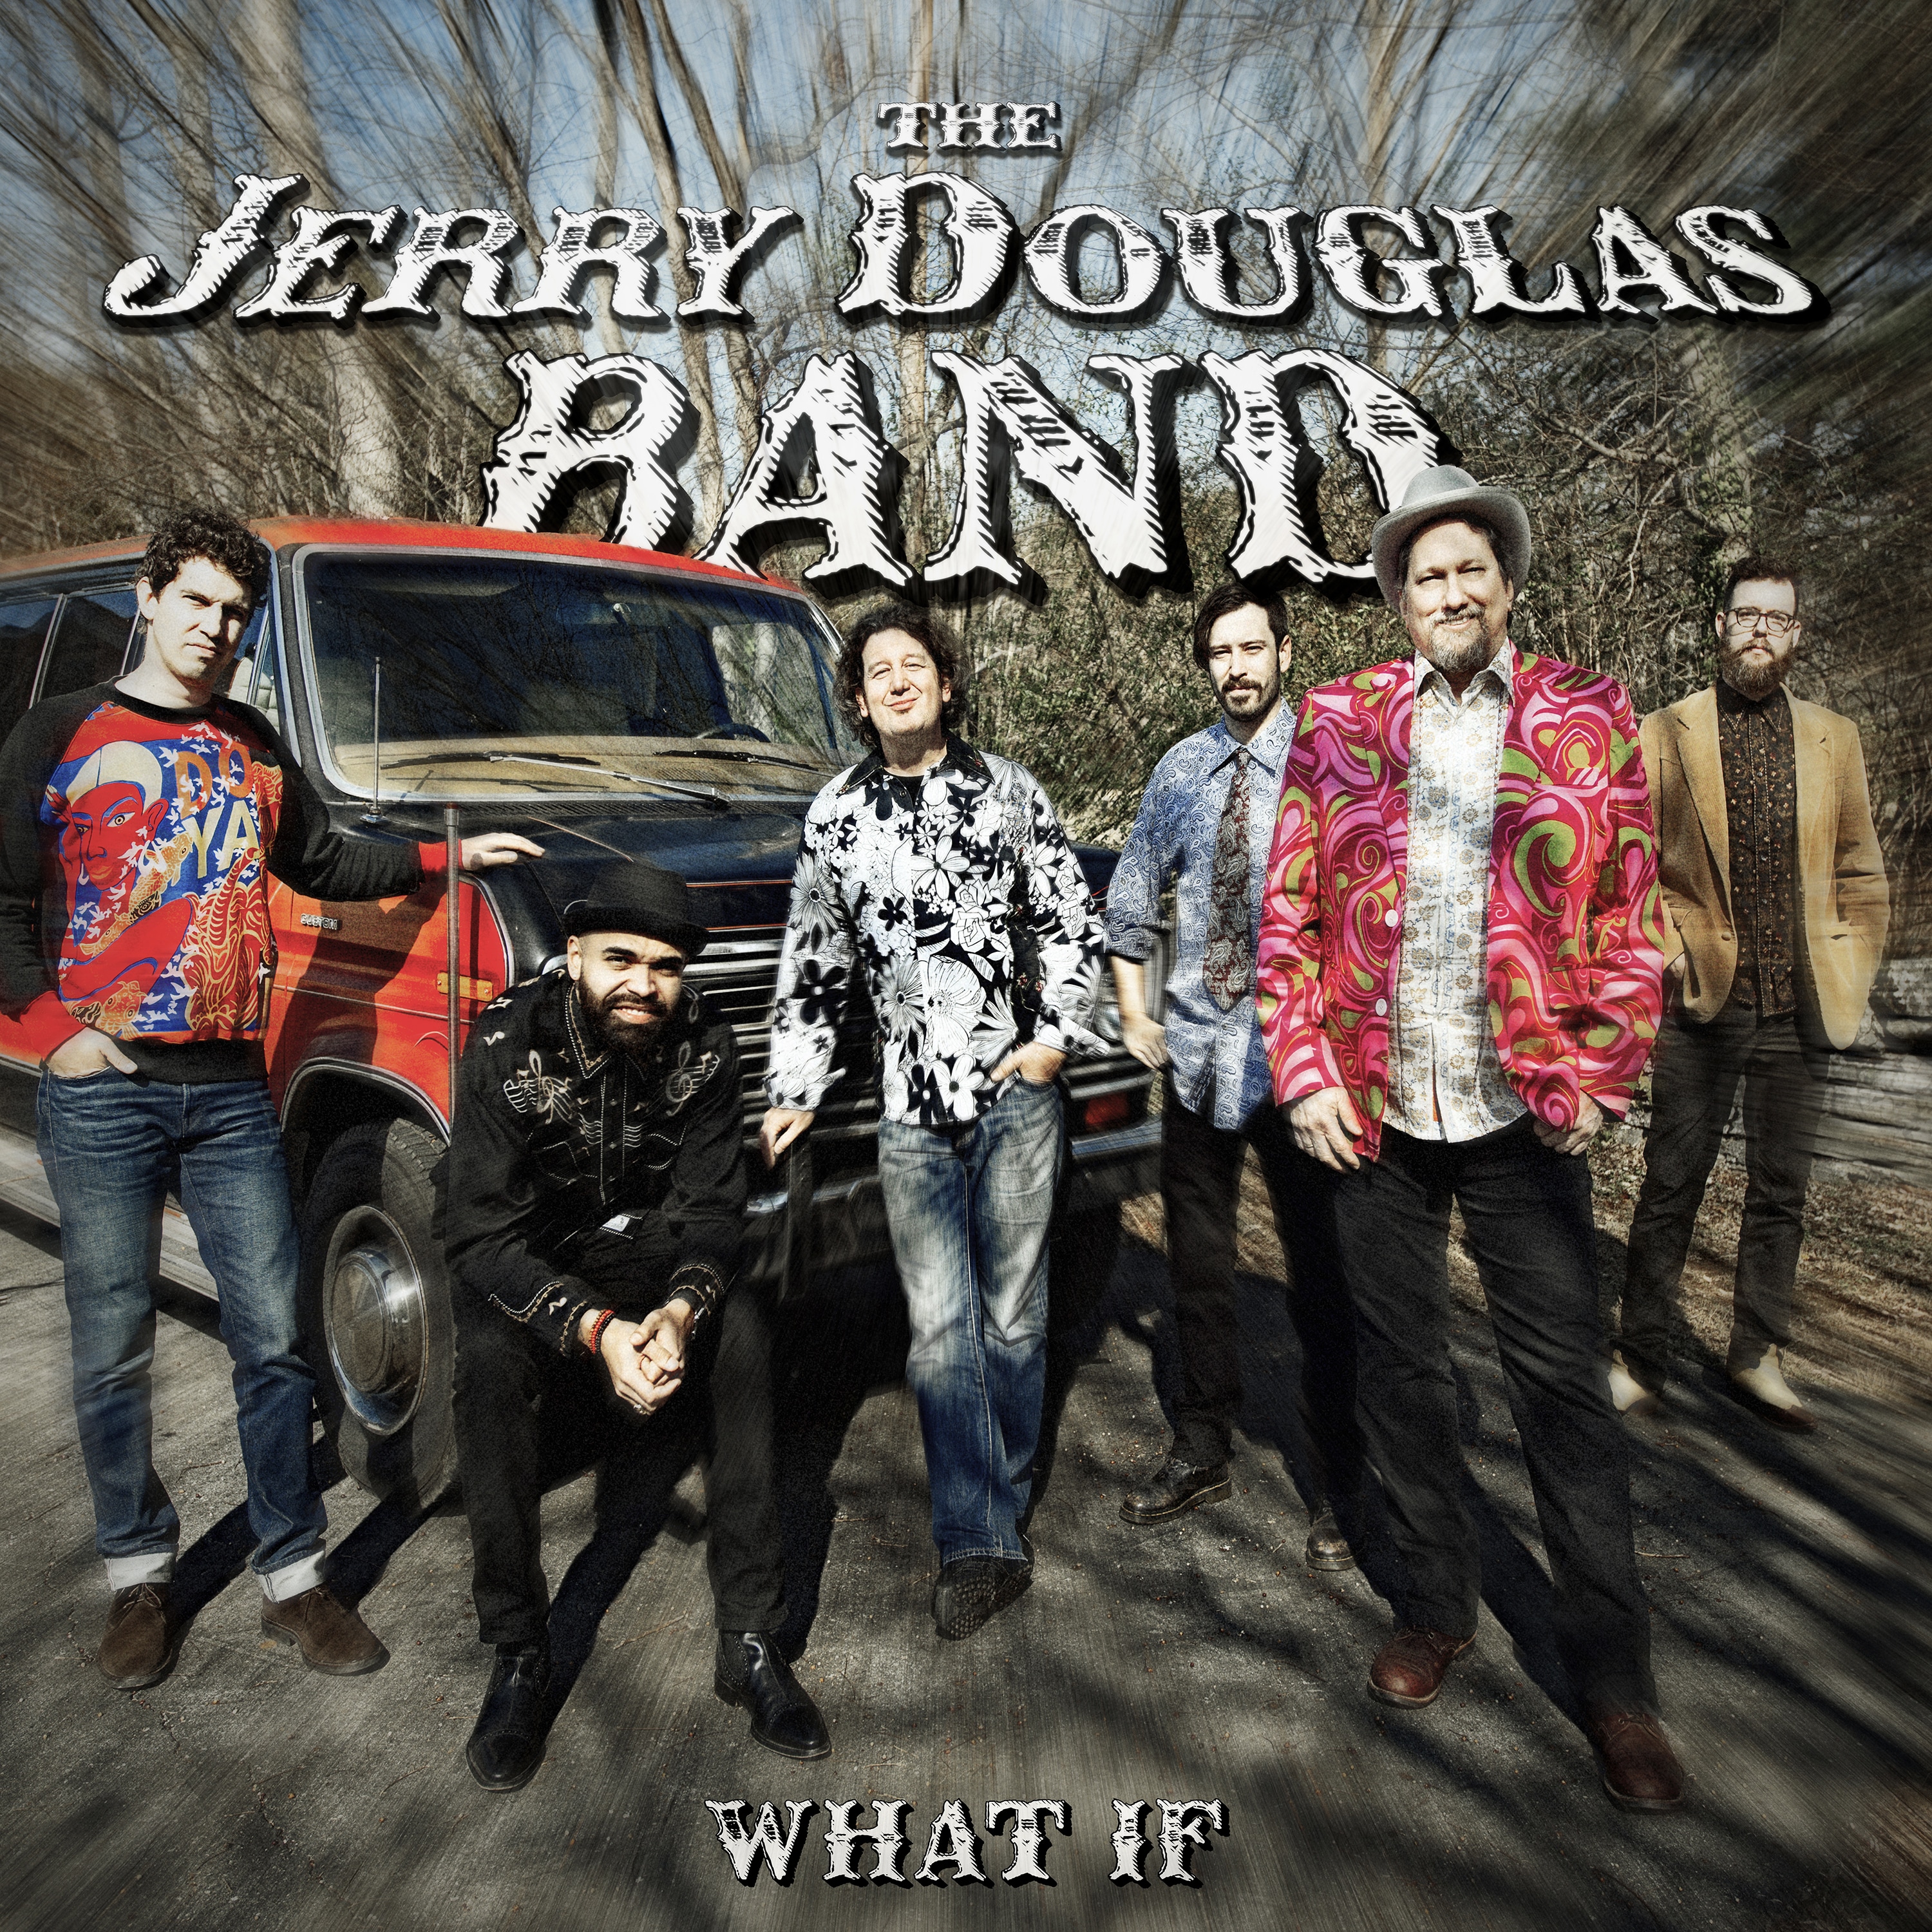 Jerry Douglas Band: What If